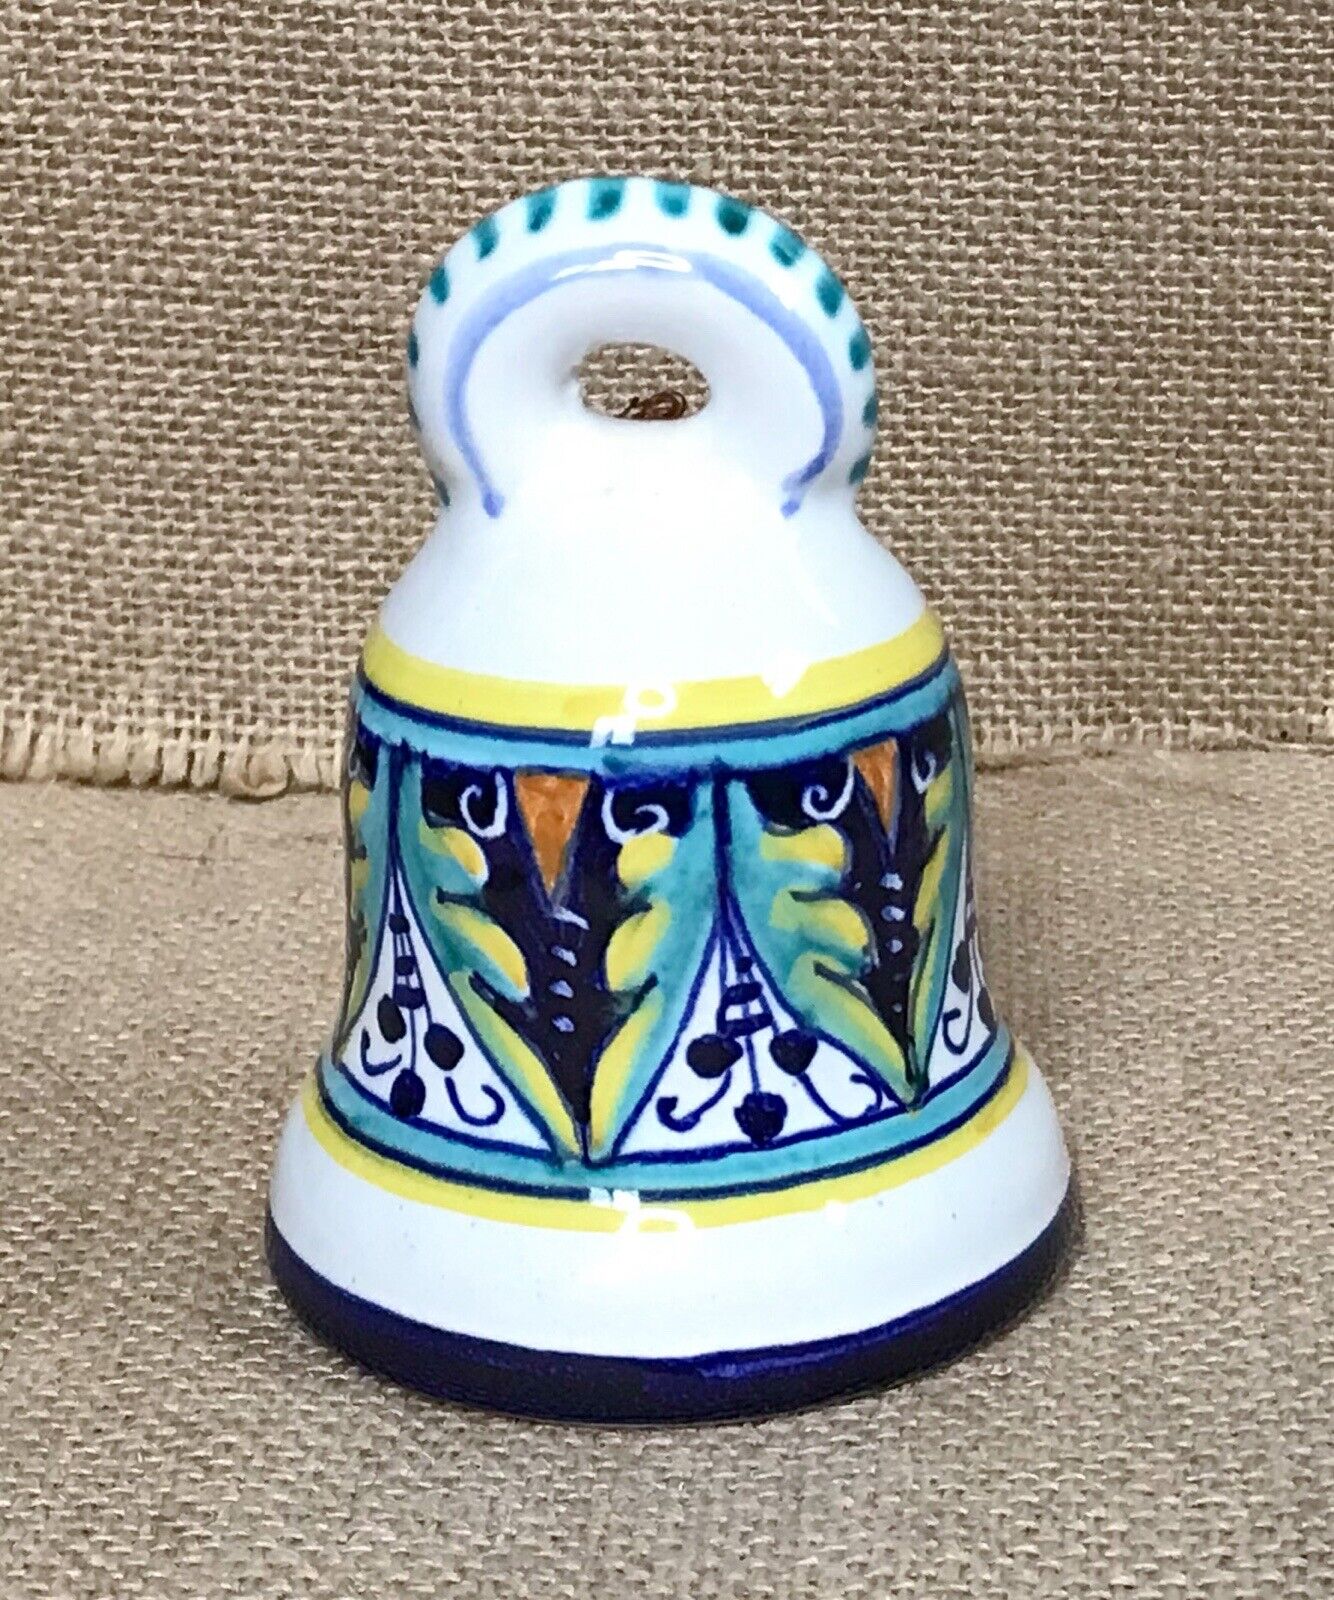 Fima Deruta Italy Art Pottery Hand Painted 3.5 Inch Bell